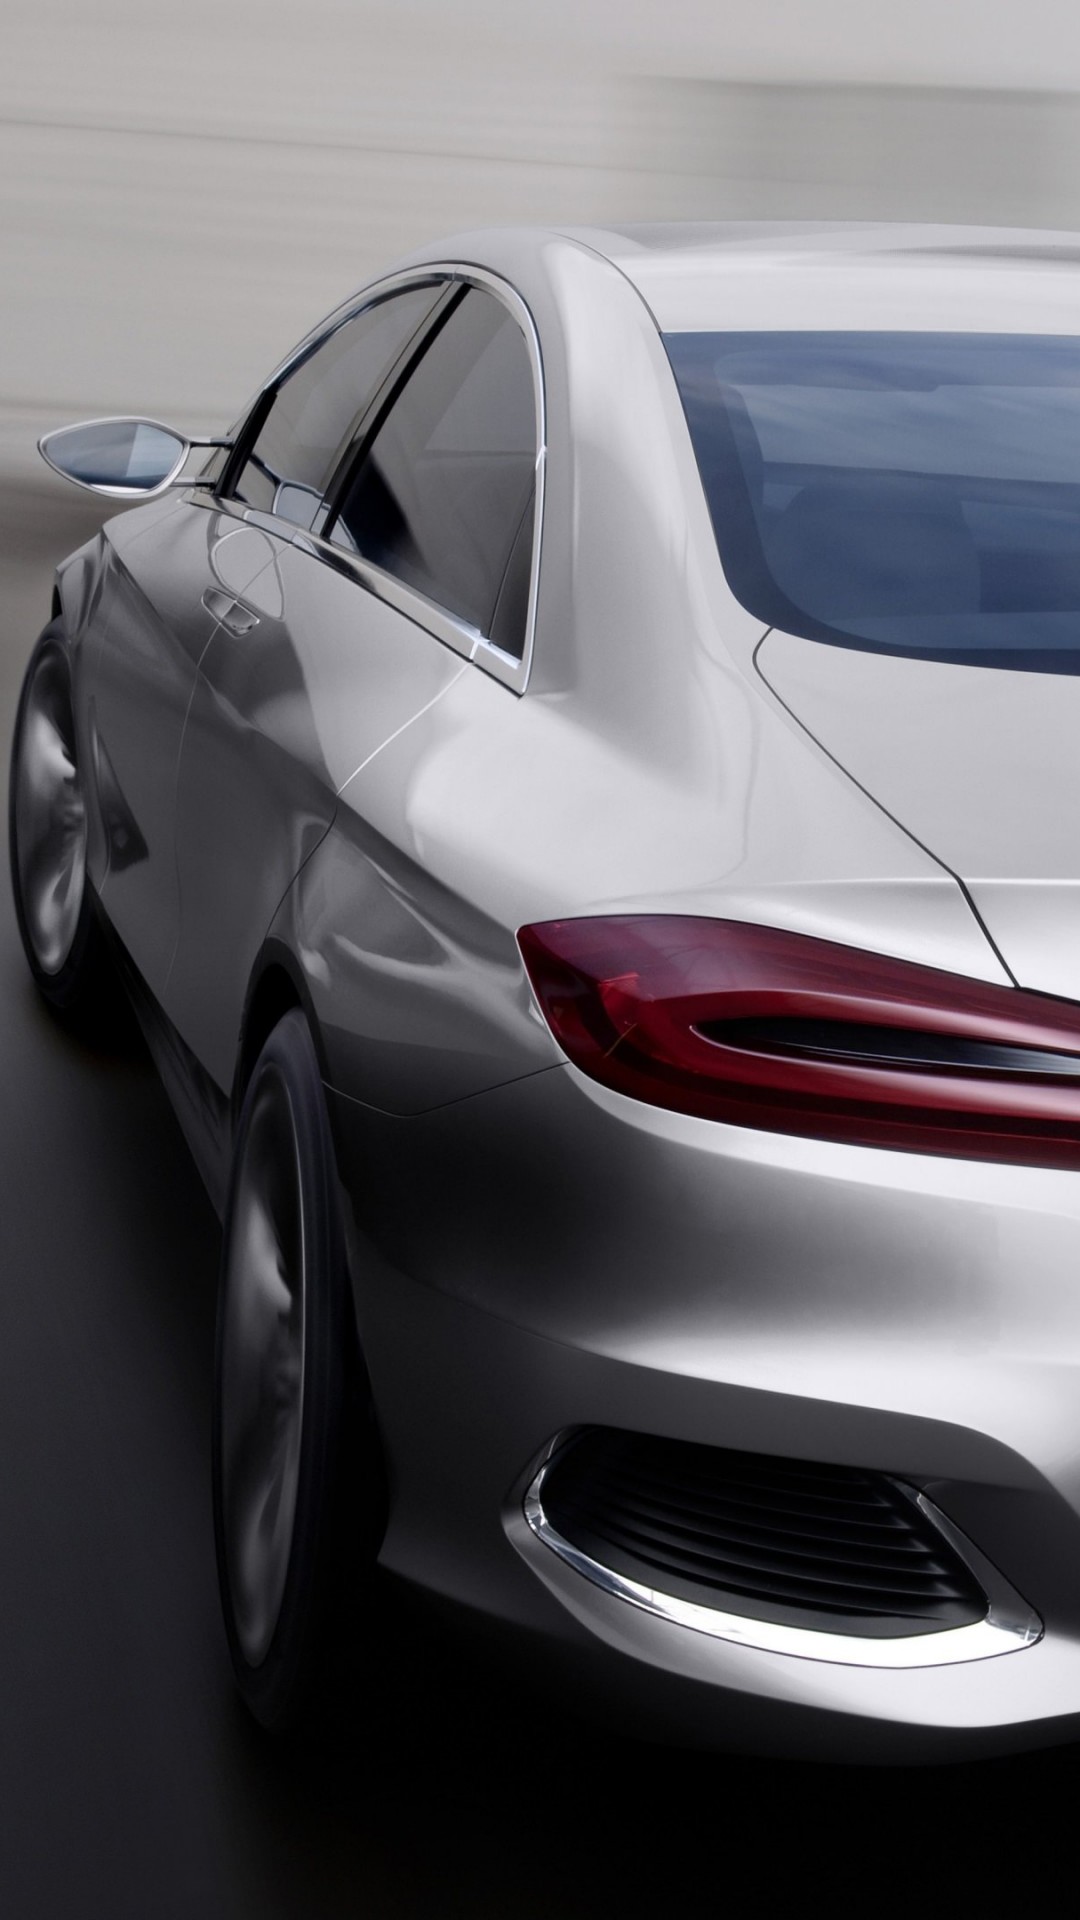 Mercedes Benz F800 Concept Rear View Wallpaper for SAMSUNG Galaxy Note 3